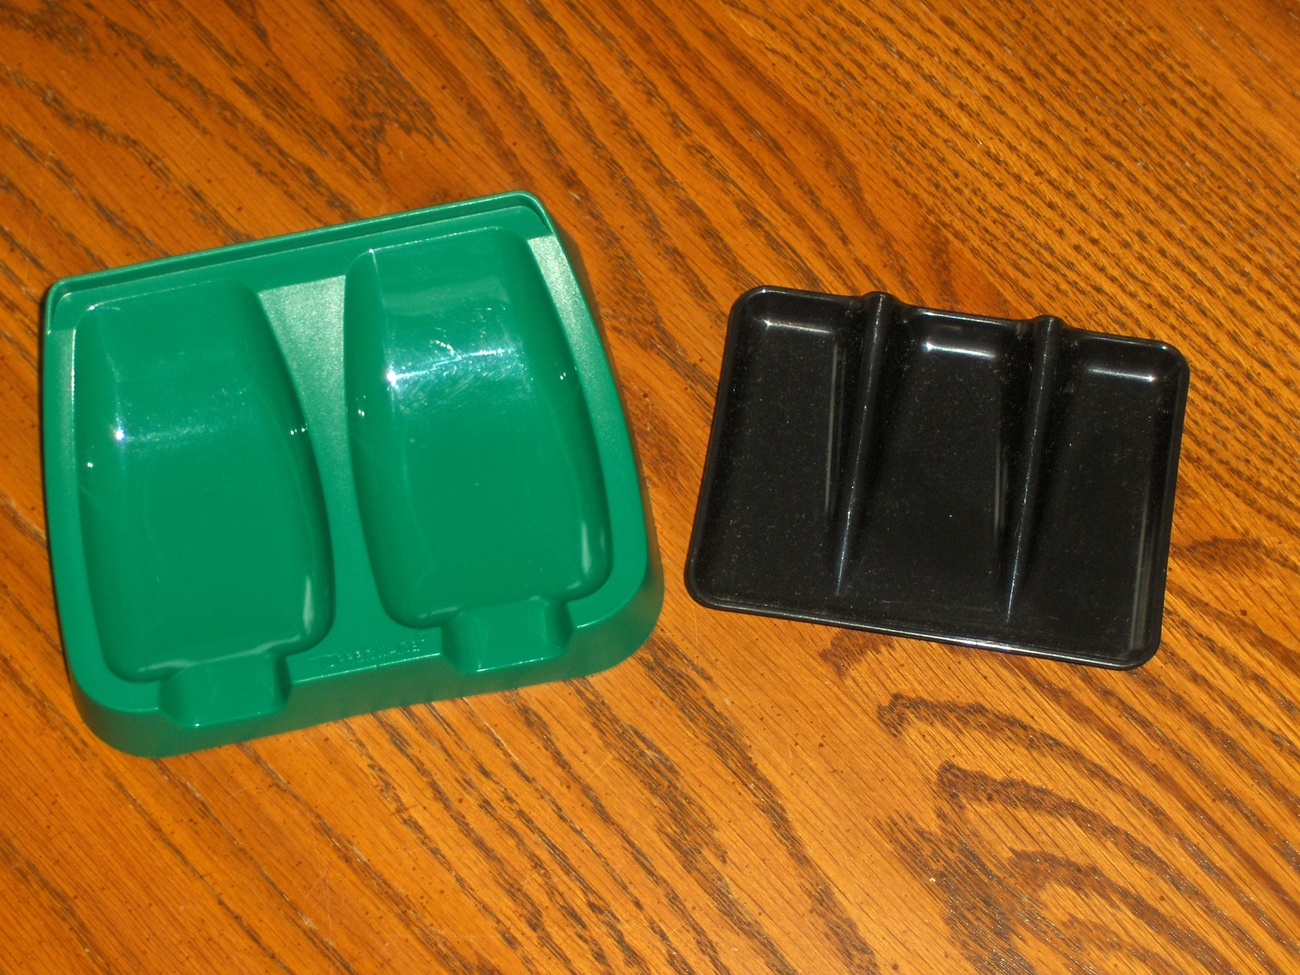 Tupperware Spoon Rest and Soap Saver - $10.97